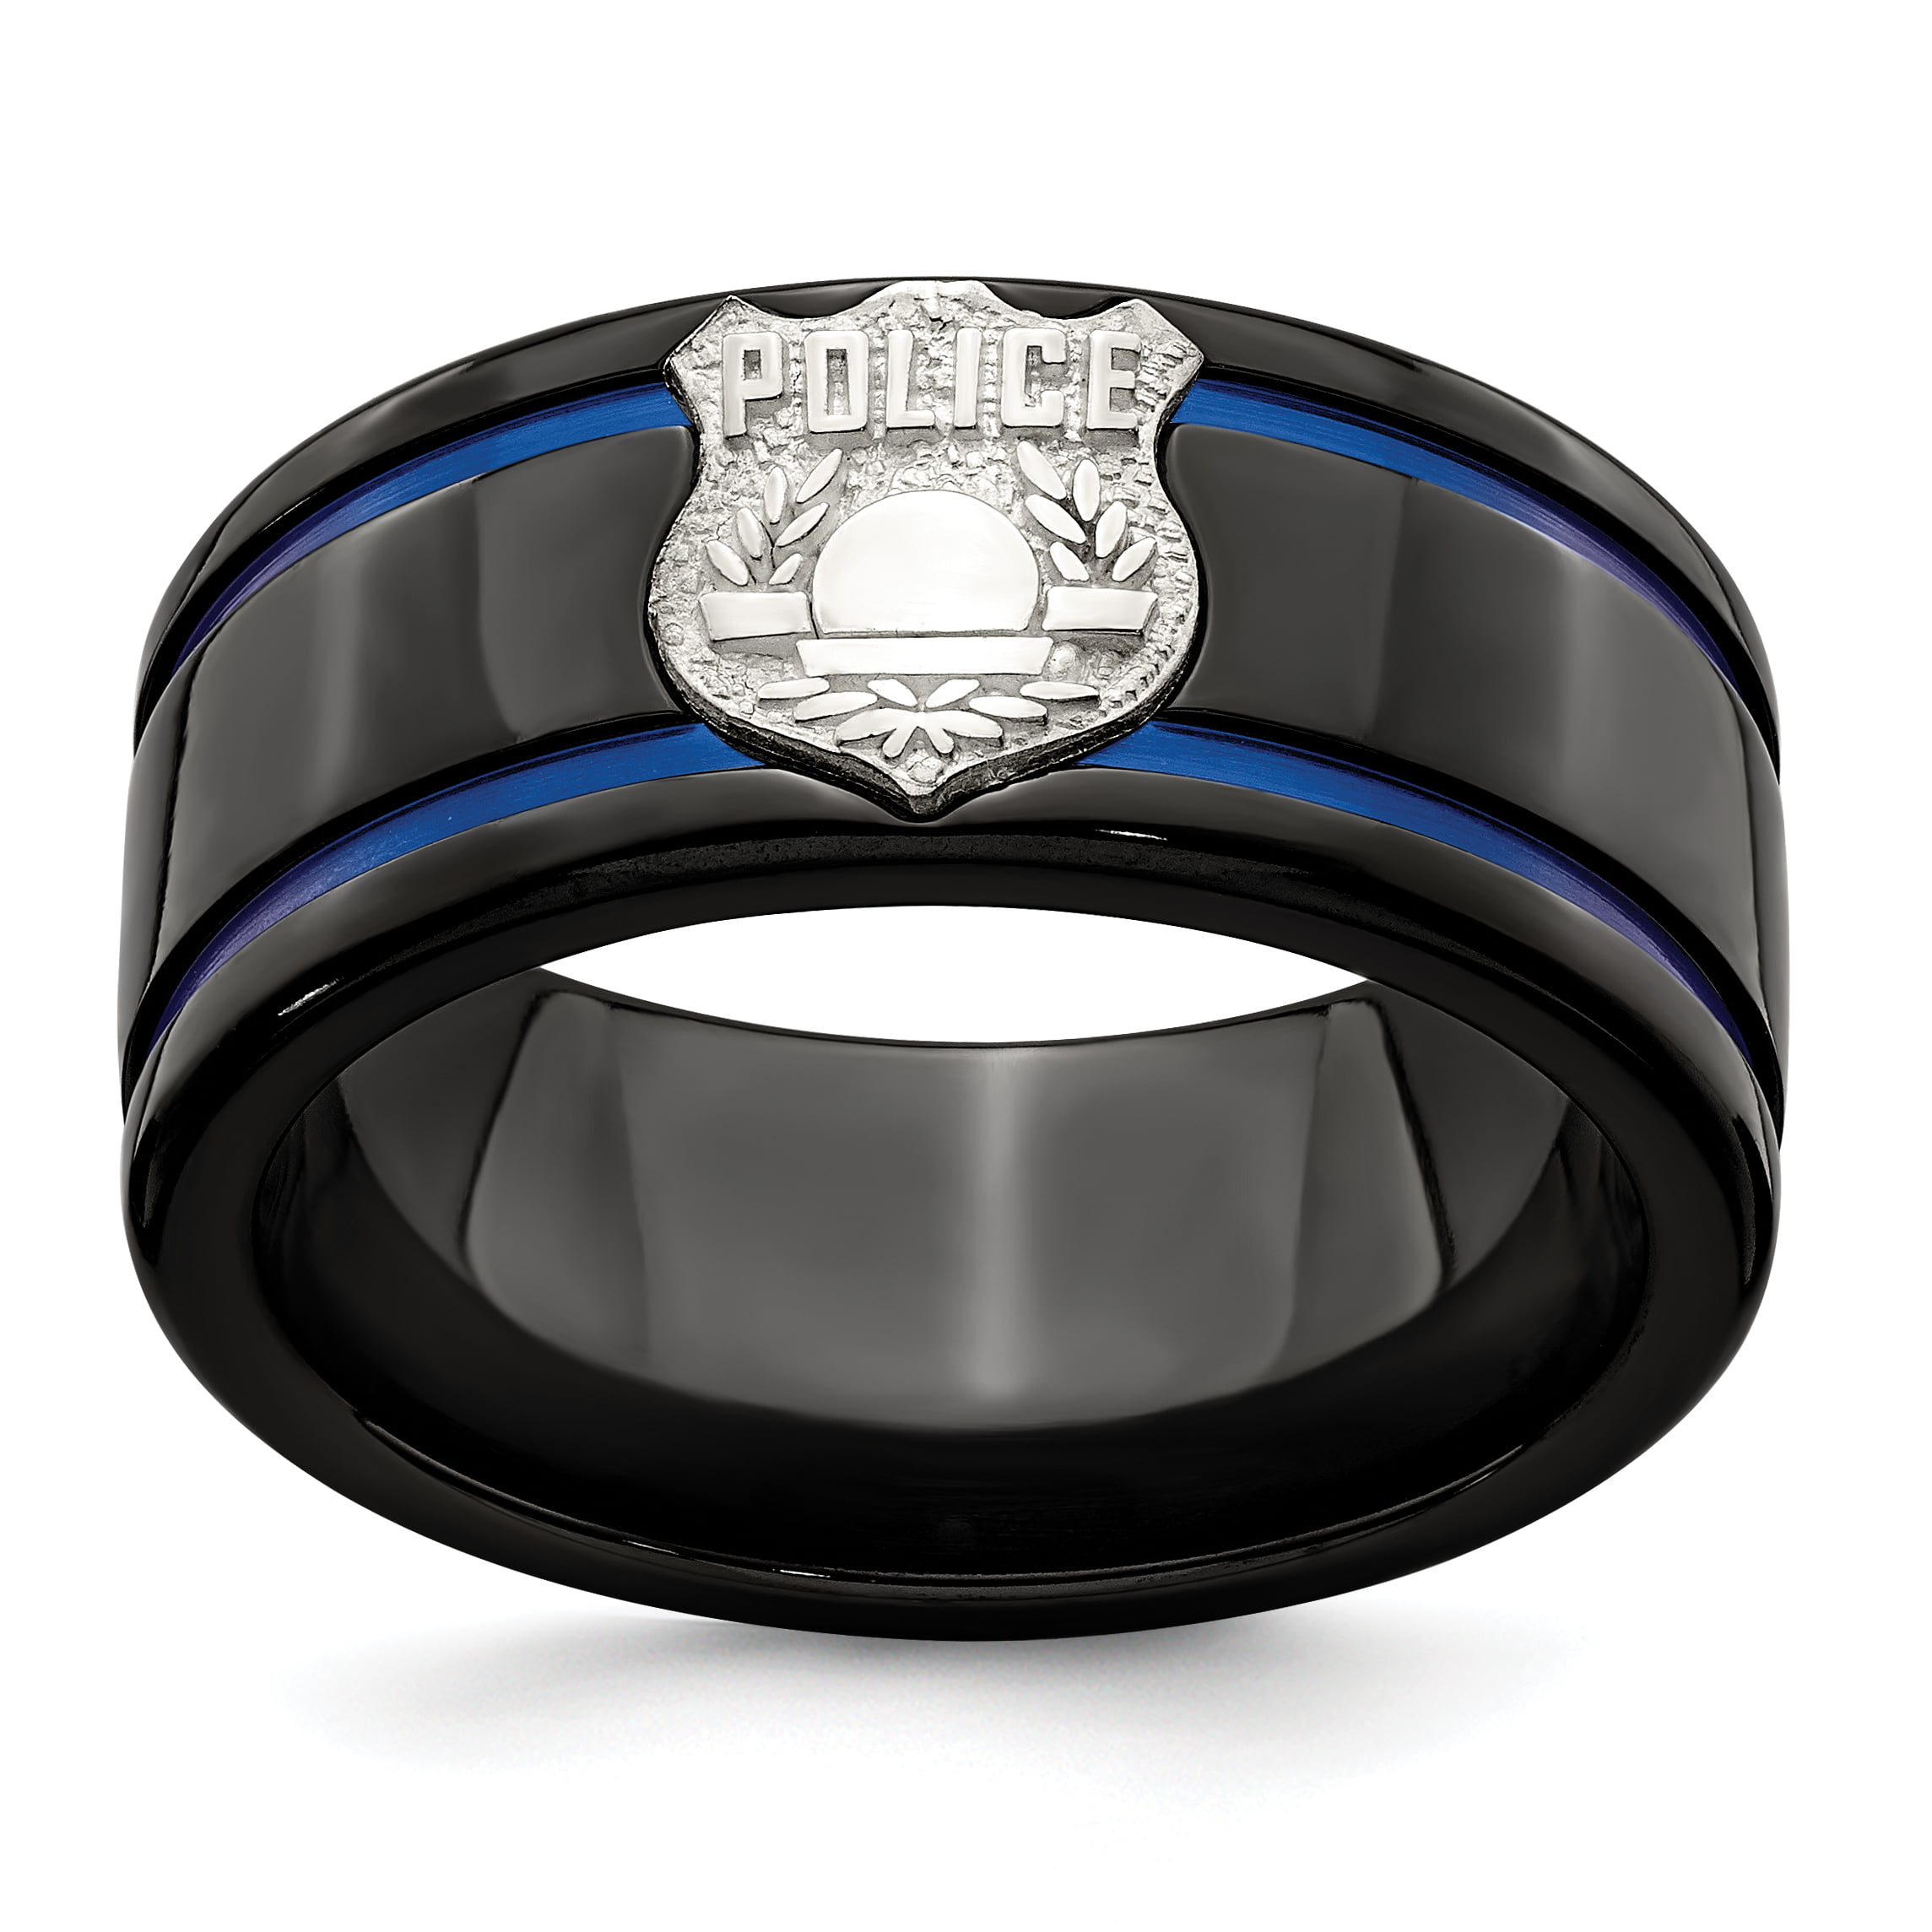 Bridal Wedding Bands Decorative Bands Edward Mirell Black Ti Blue Anodized with SS Police Shield Tag 10mm Band Size 8 